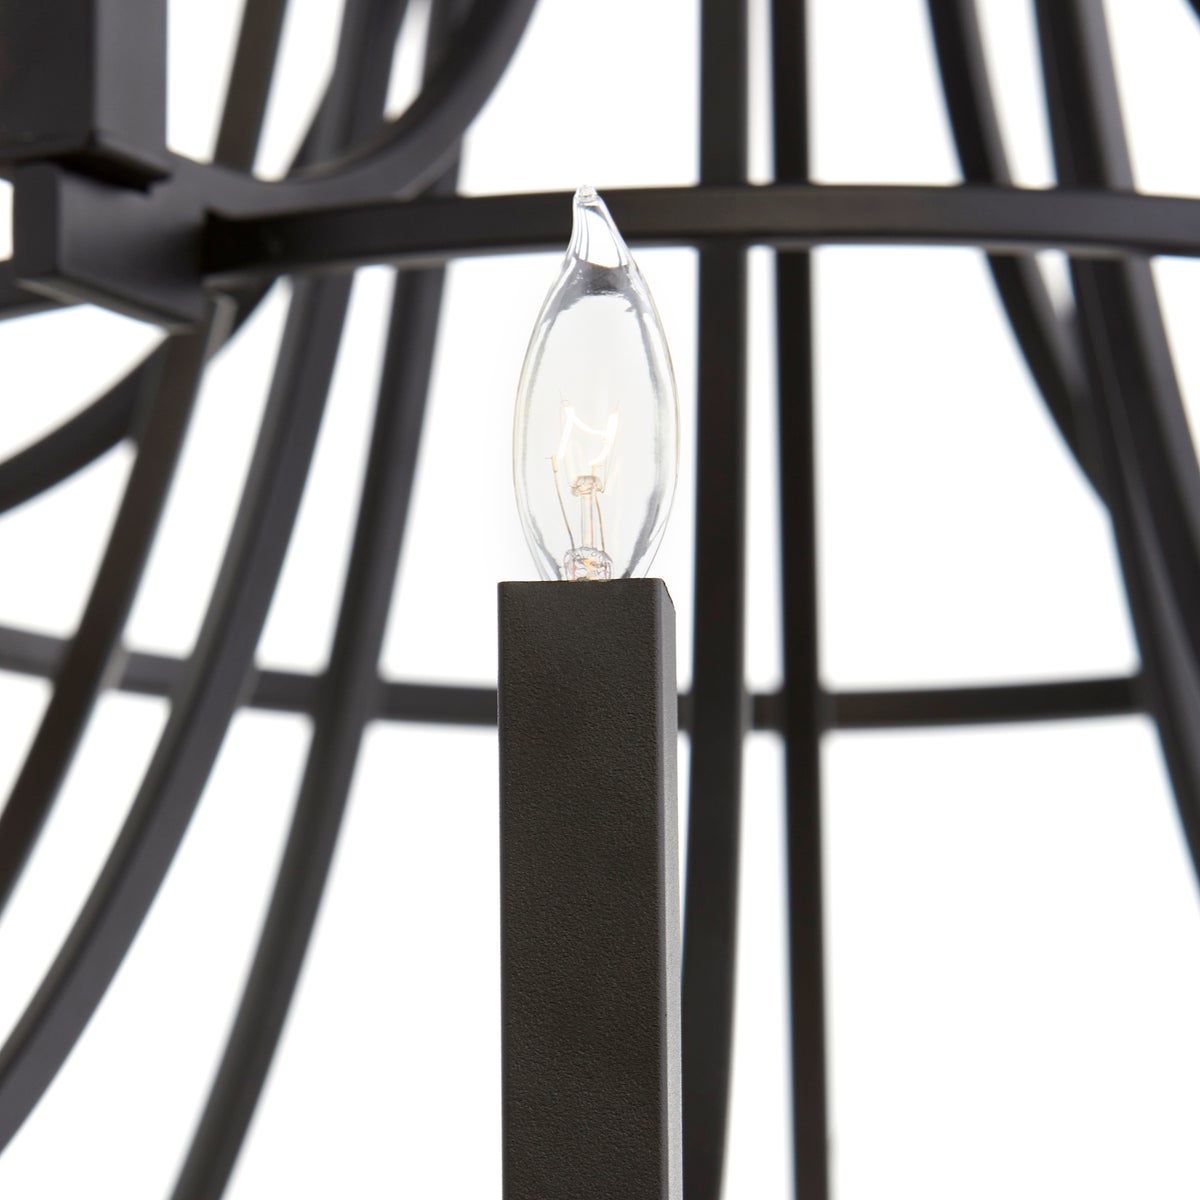 Black Chandelier with geometric design and interchangeable candle sleeves. Suspended from adjustable chain and stem mounting system. Perfect for any interior space.